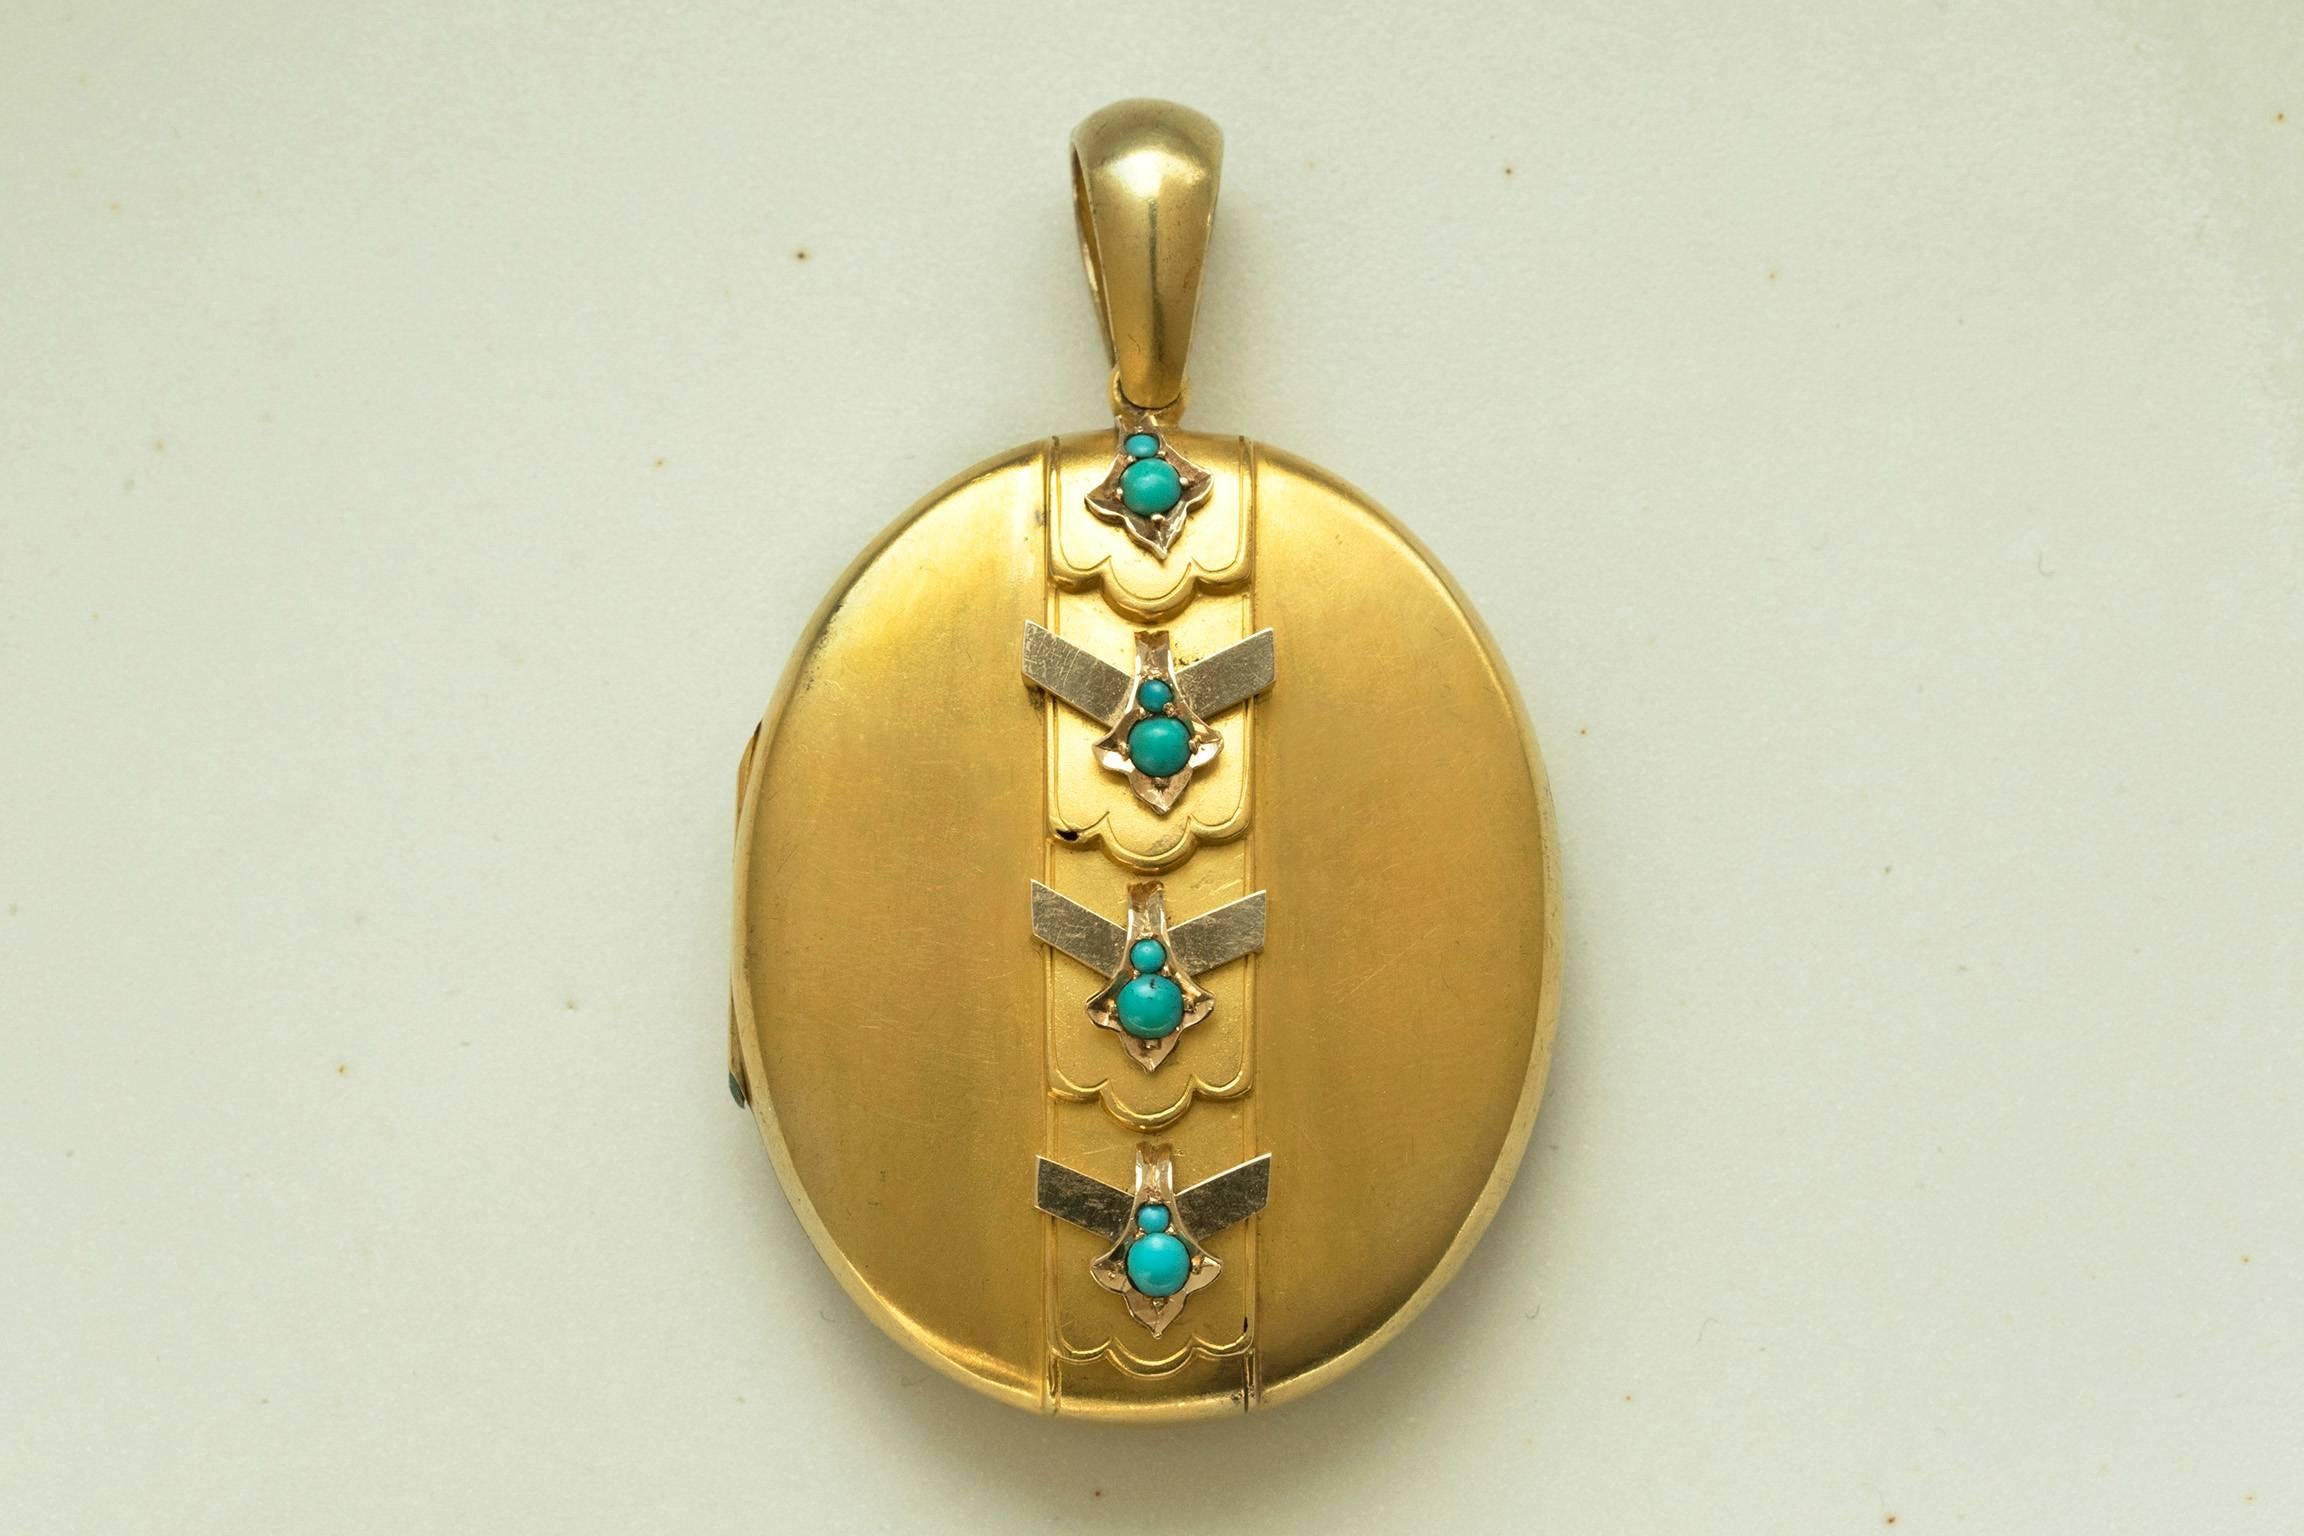 A large oval late Victorian gold locket with turquoise. The back panel is beautifully engraved with a chased foliate motif. The locket shuts with a good snap, and there are two photo compartments inside. There is a tiny hole on the second tier on